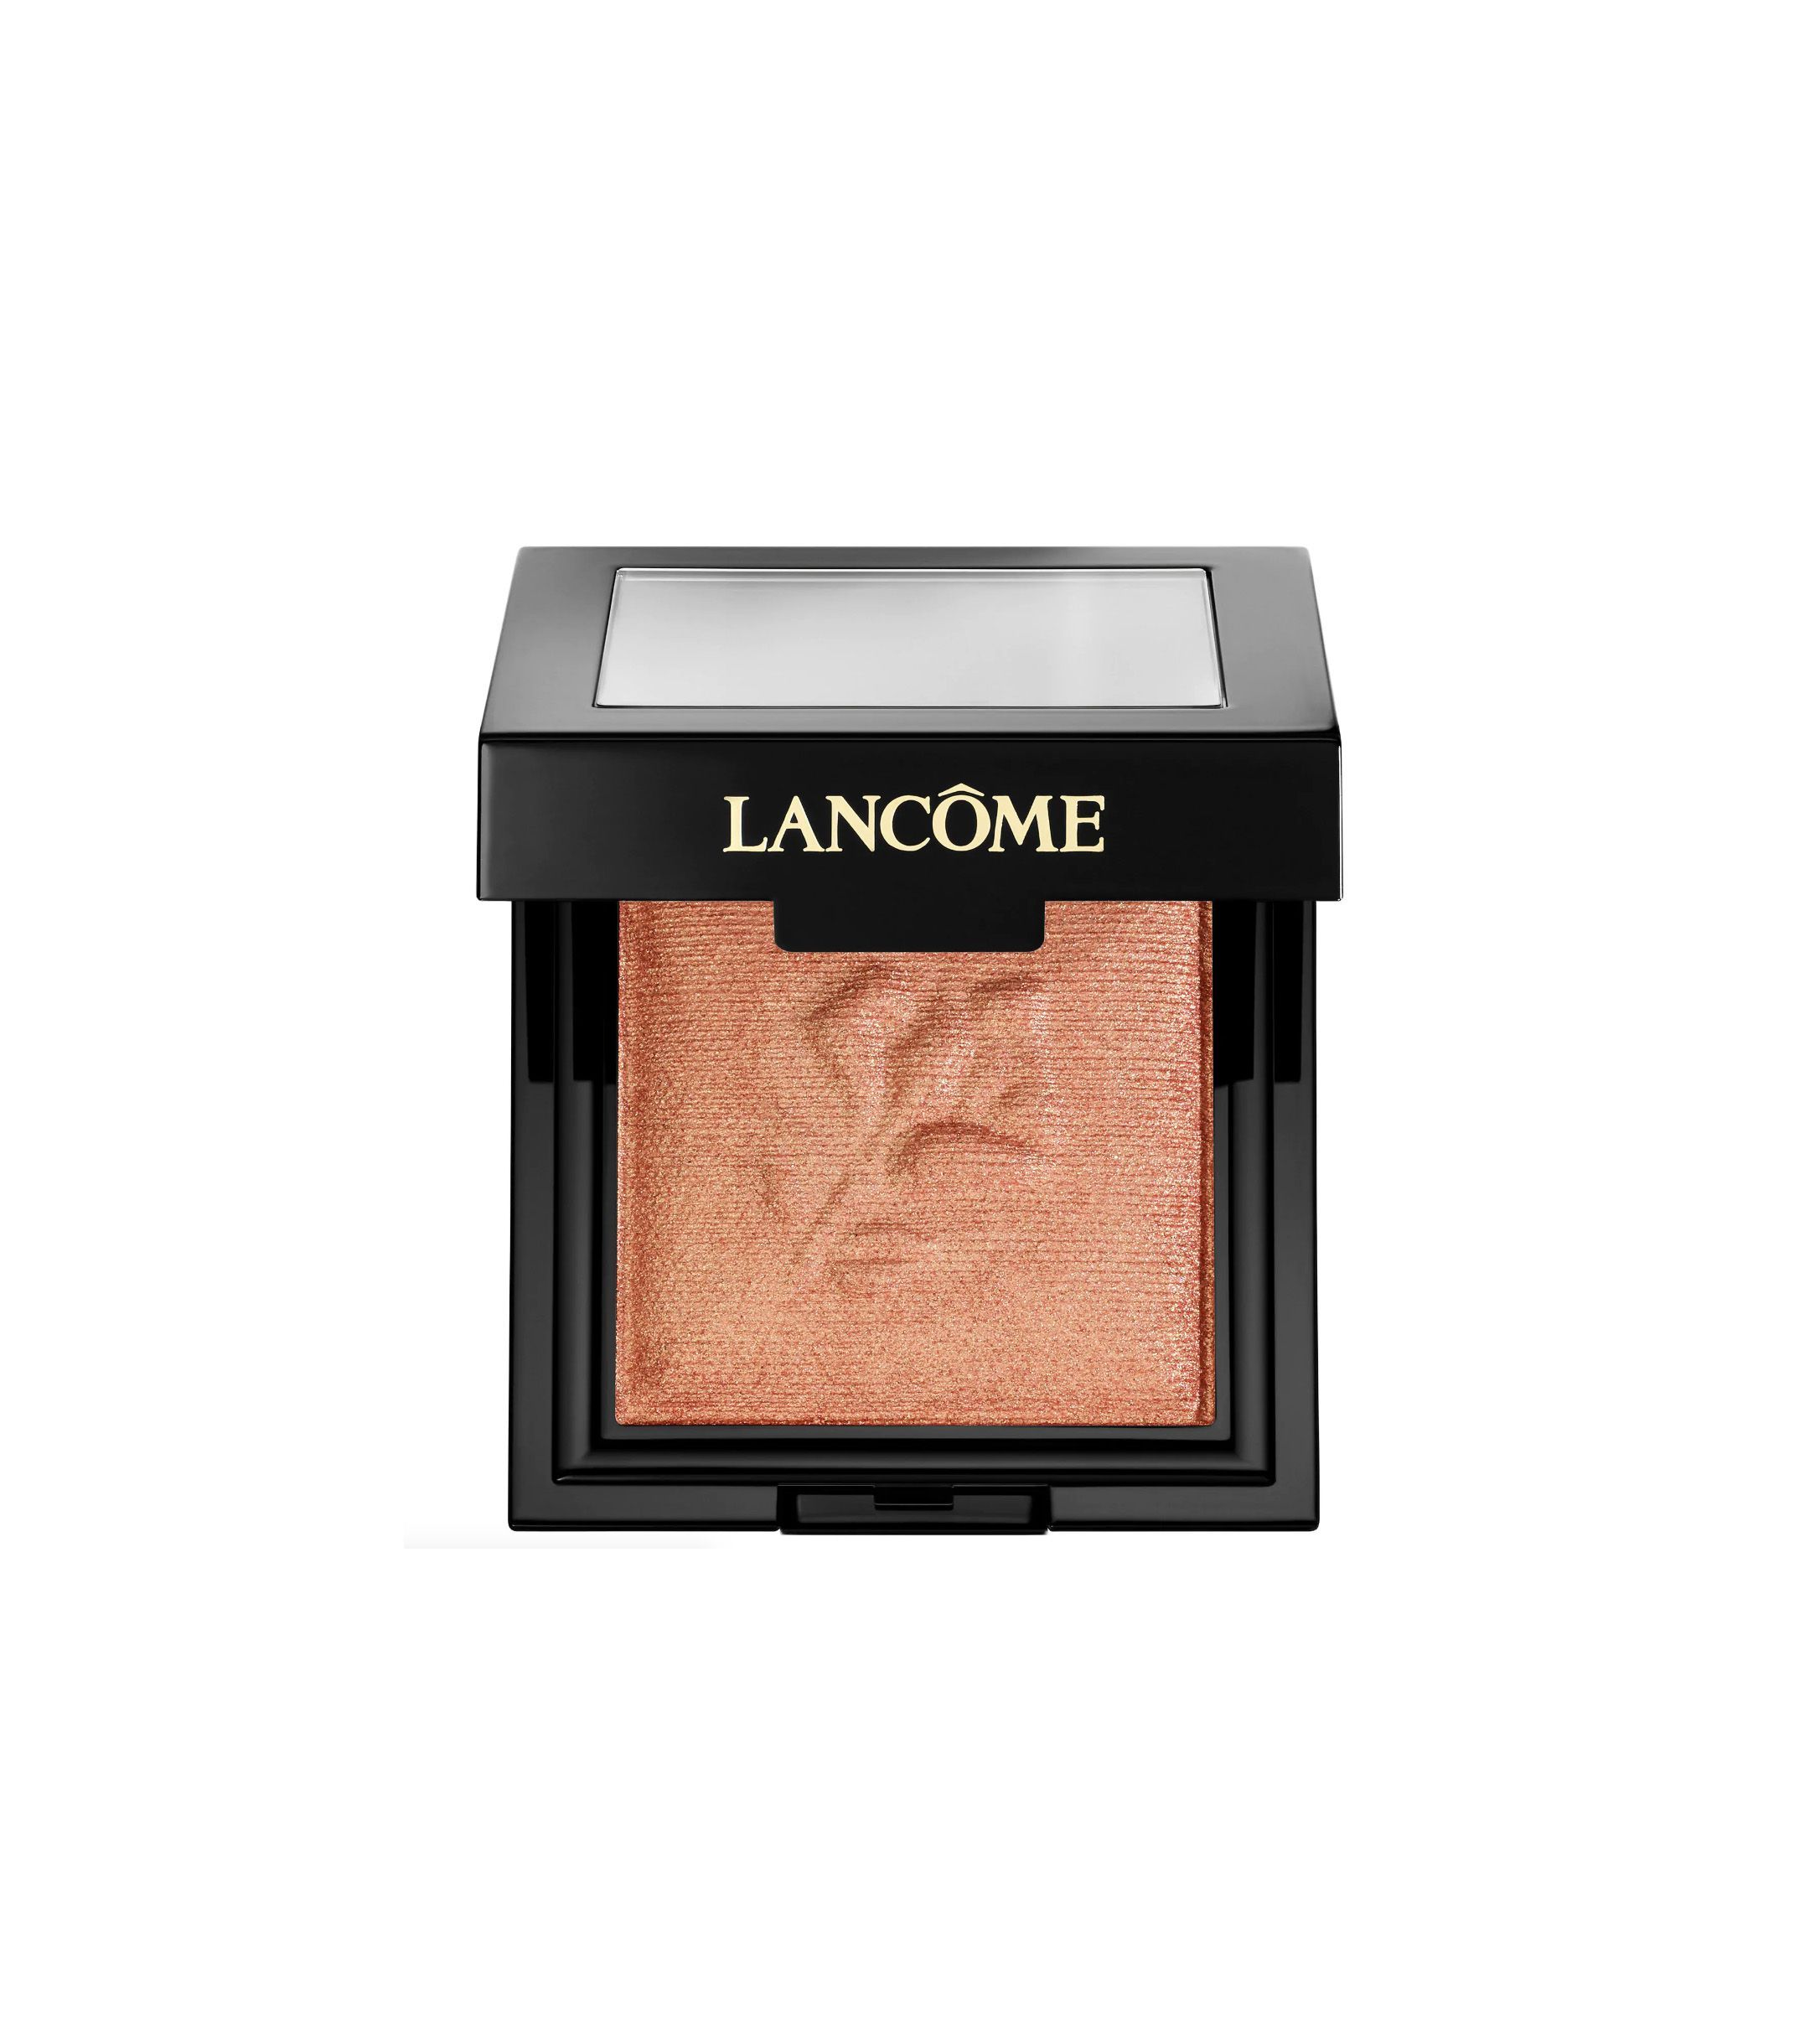 Le Monochromatique Eyeshadow and Highlighter